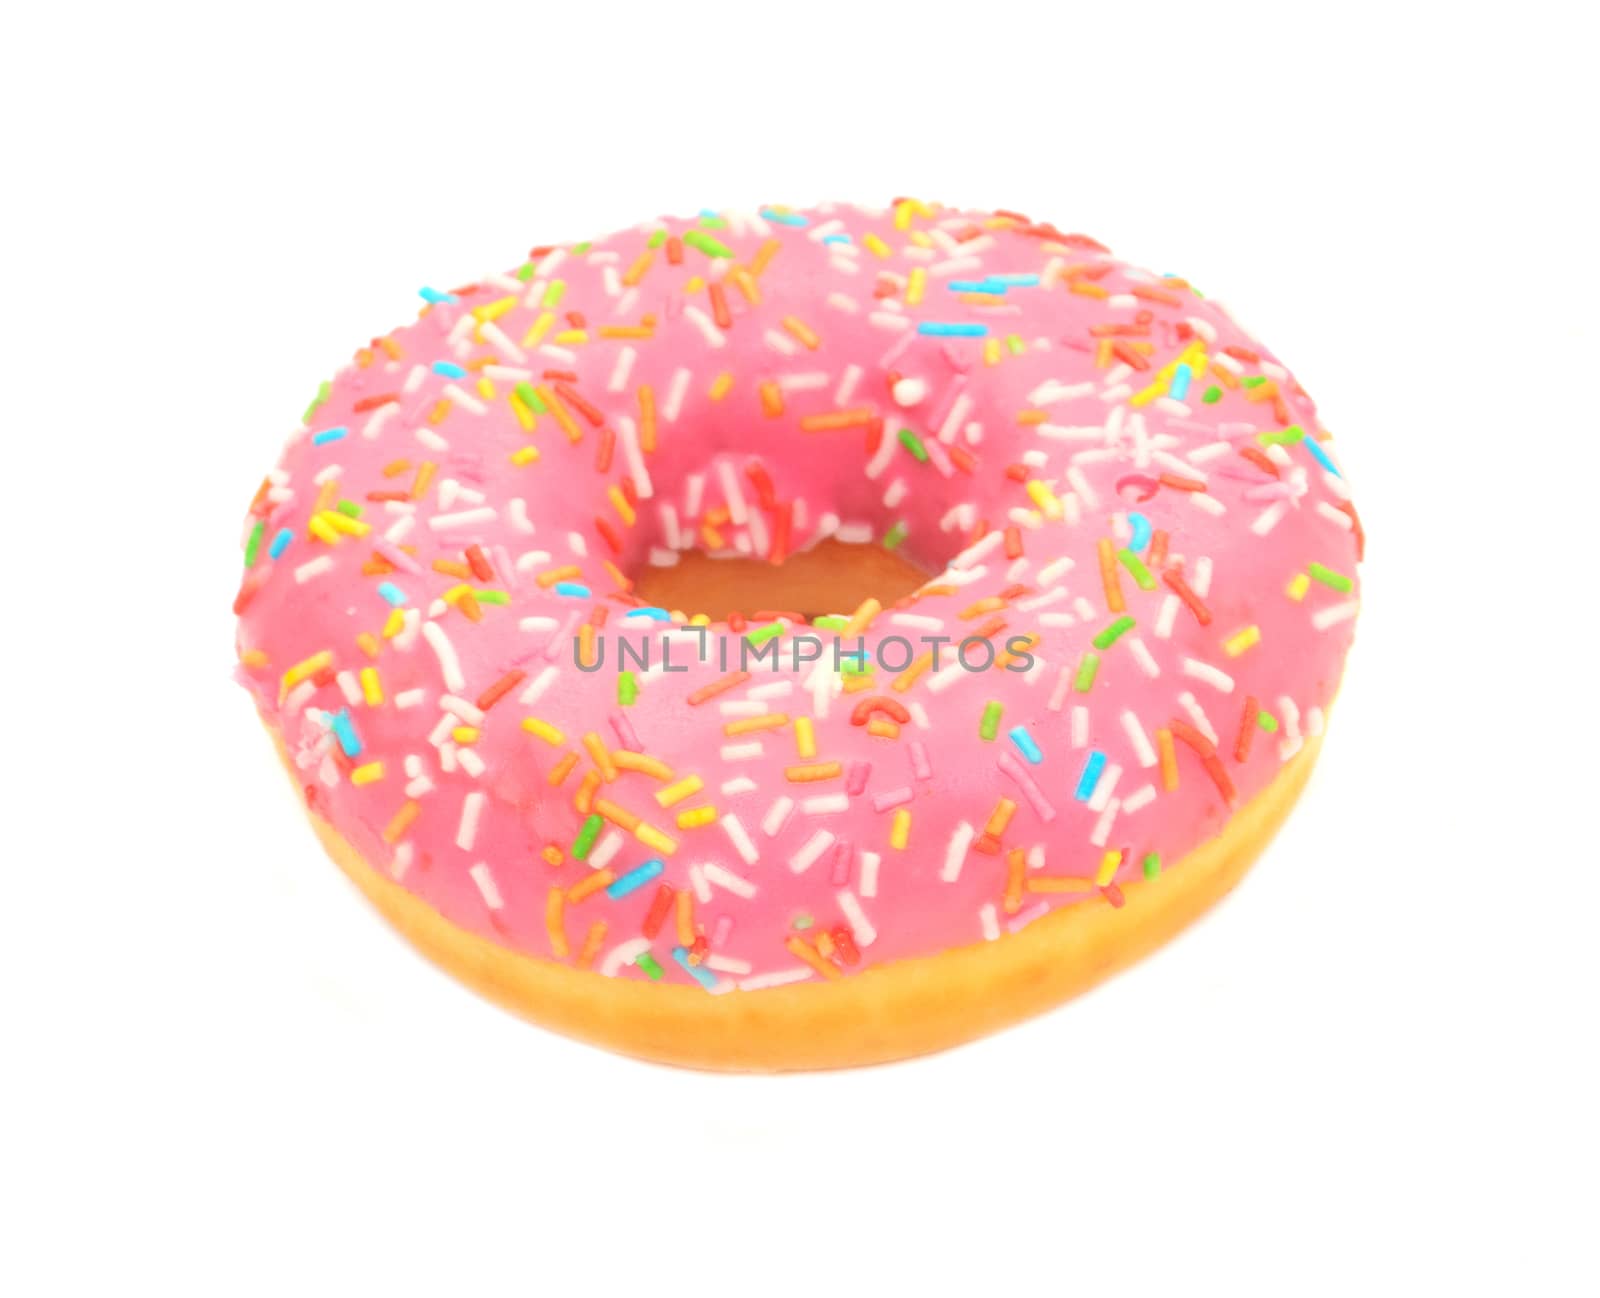 Pink glazed donut isolated on white background by andre_dechapelle